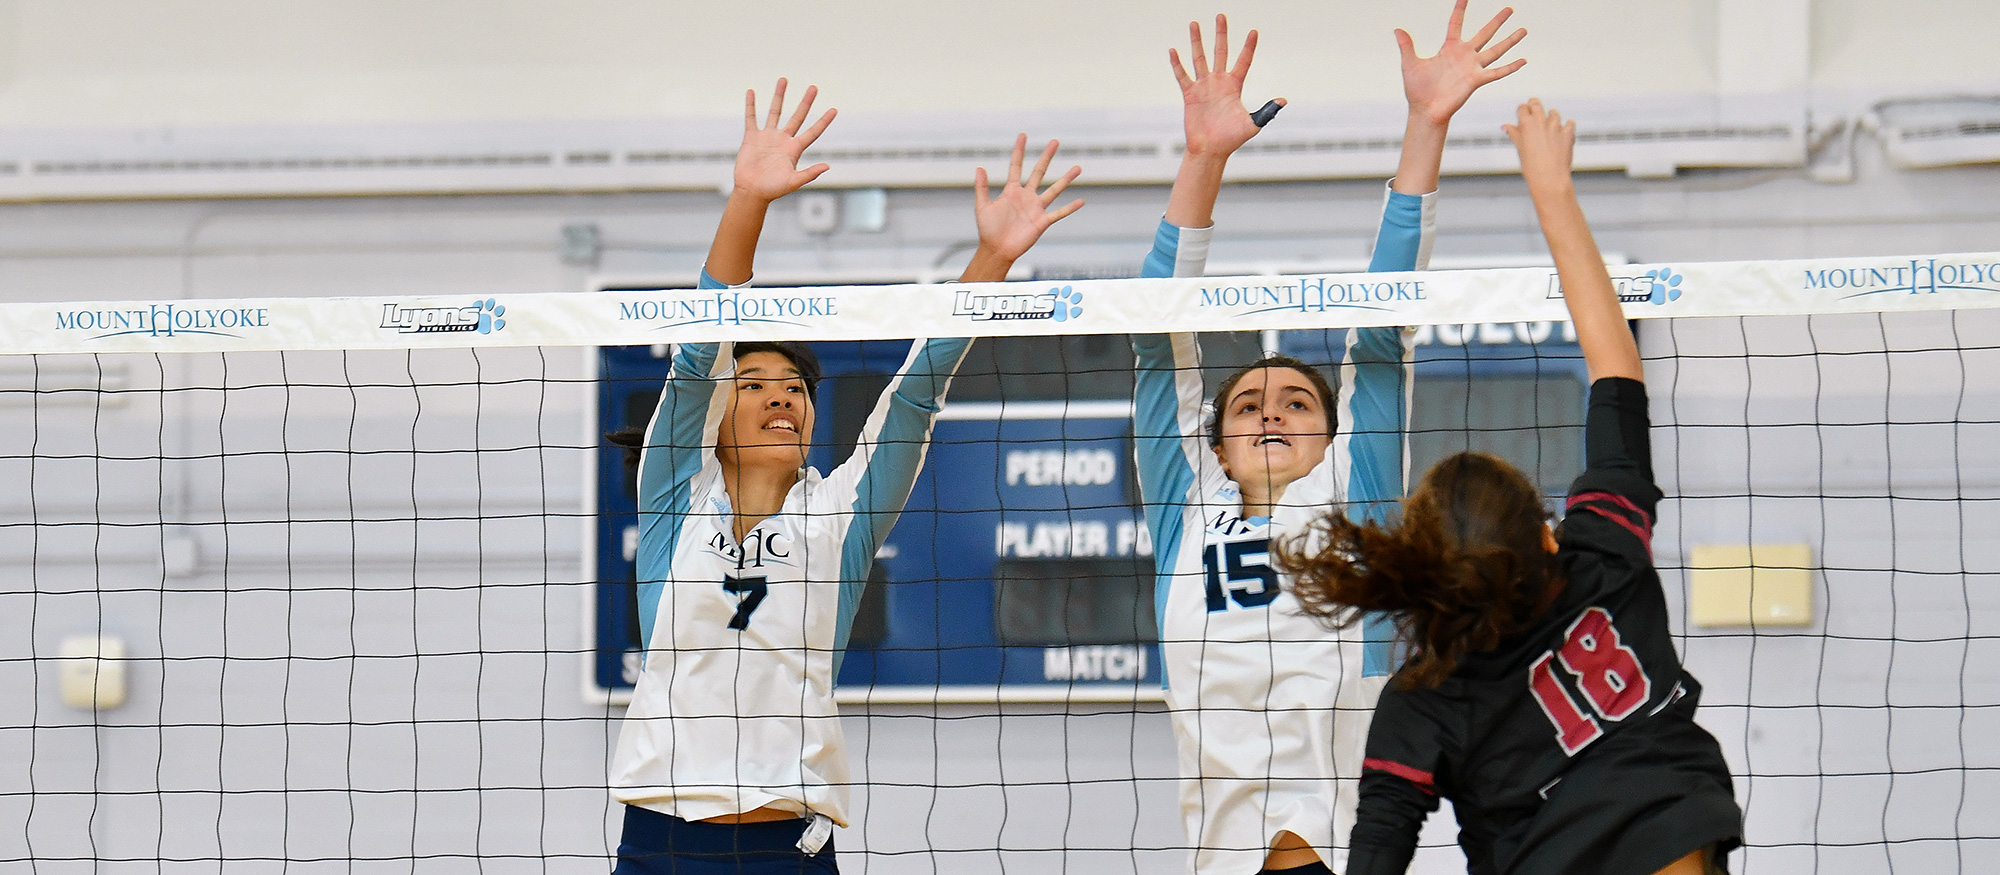 Elle Rimando (left) had three kills and Madeline Barton (right) had a team-high seven in Mount Holyoke's 3-0 loss at Emerson on Oct. 29, 2022. (RJB Sports file photo)